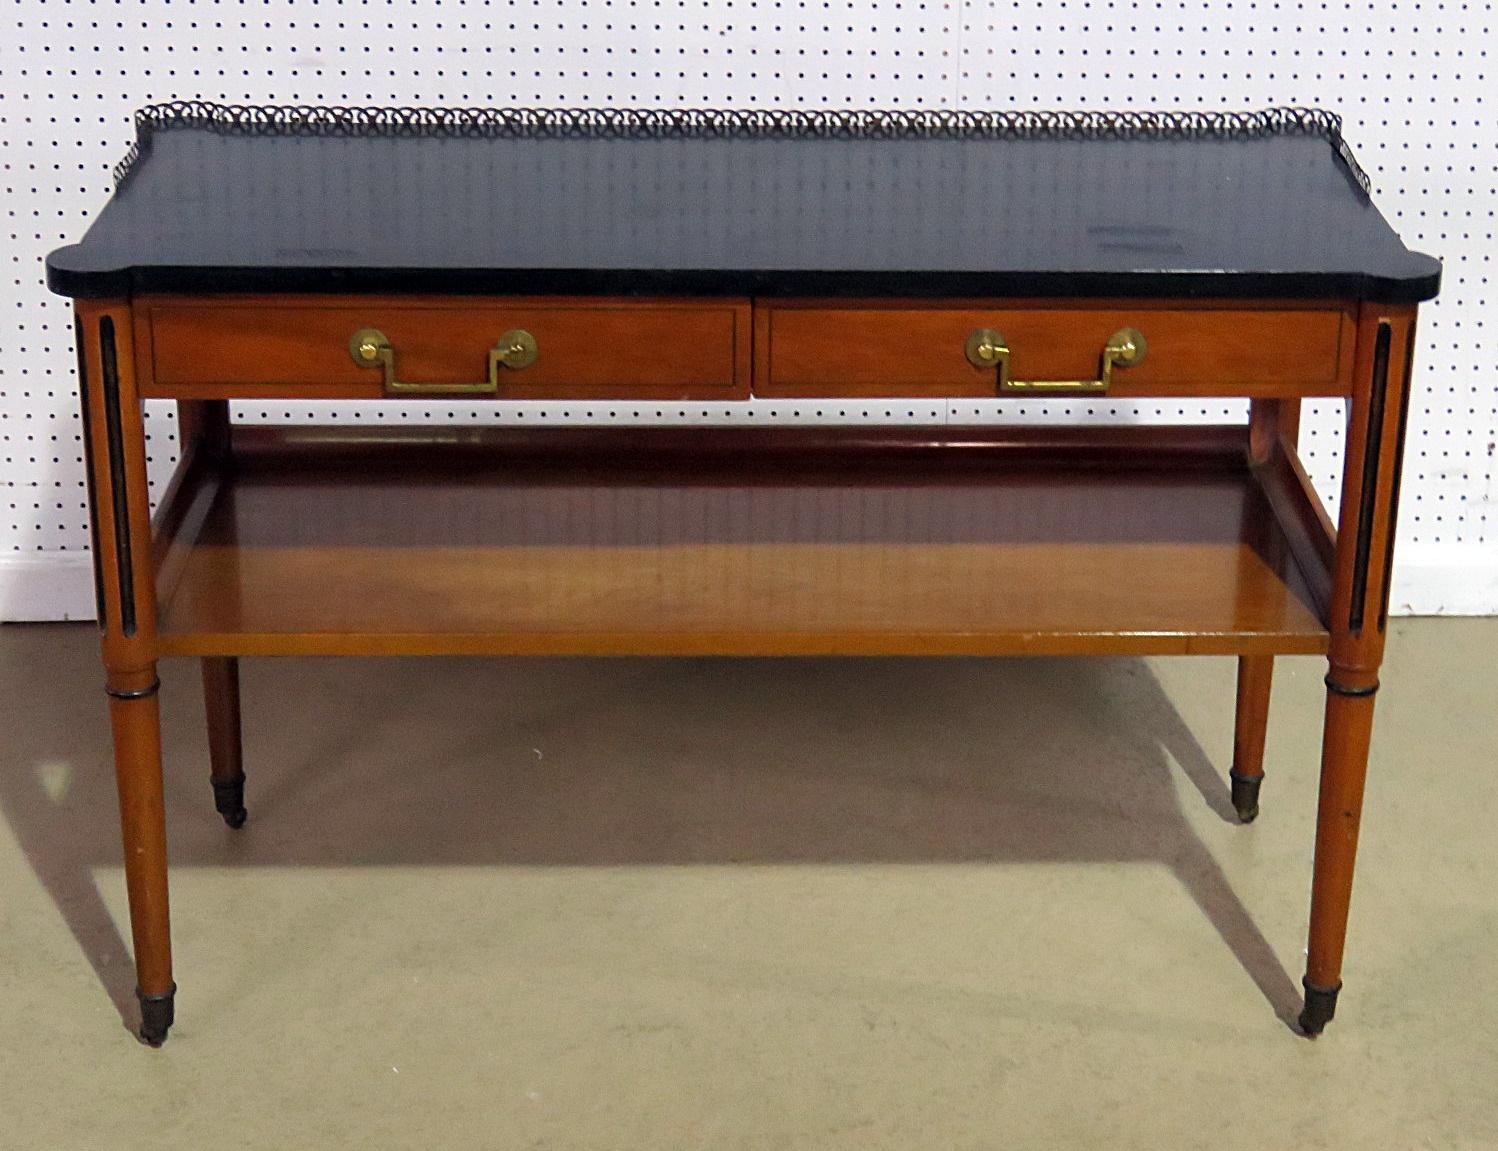 Directoire style server by Nahon with two drawers, ebonized top, brass hardware and on casters.